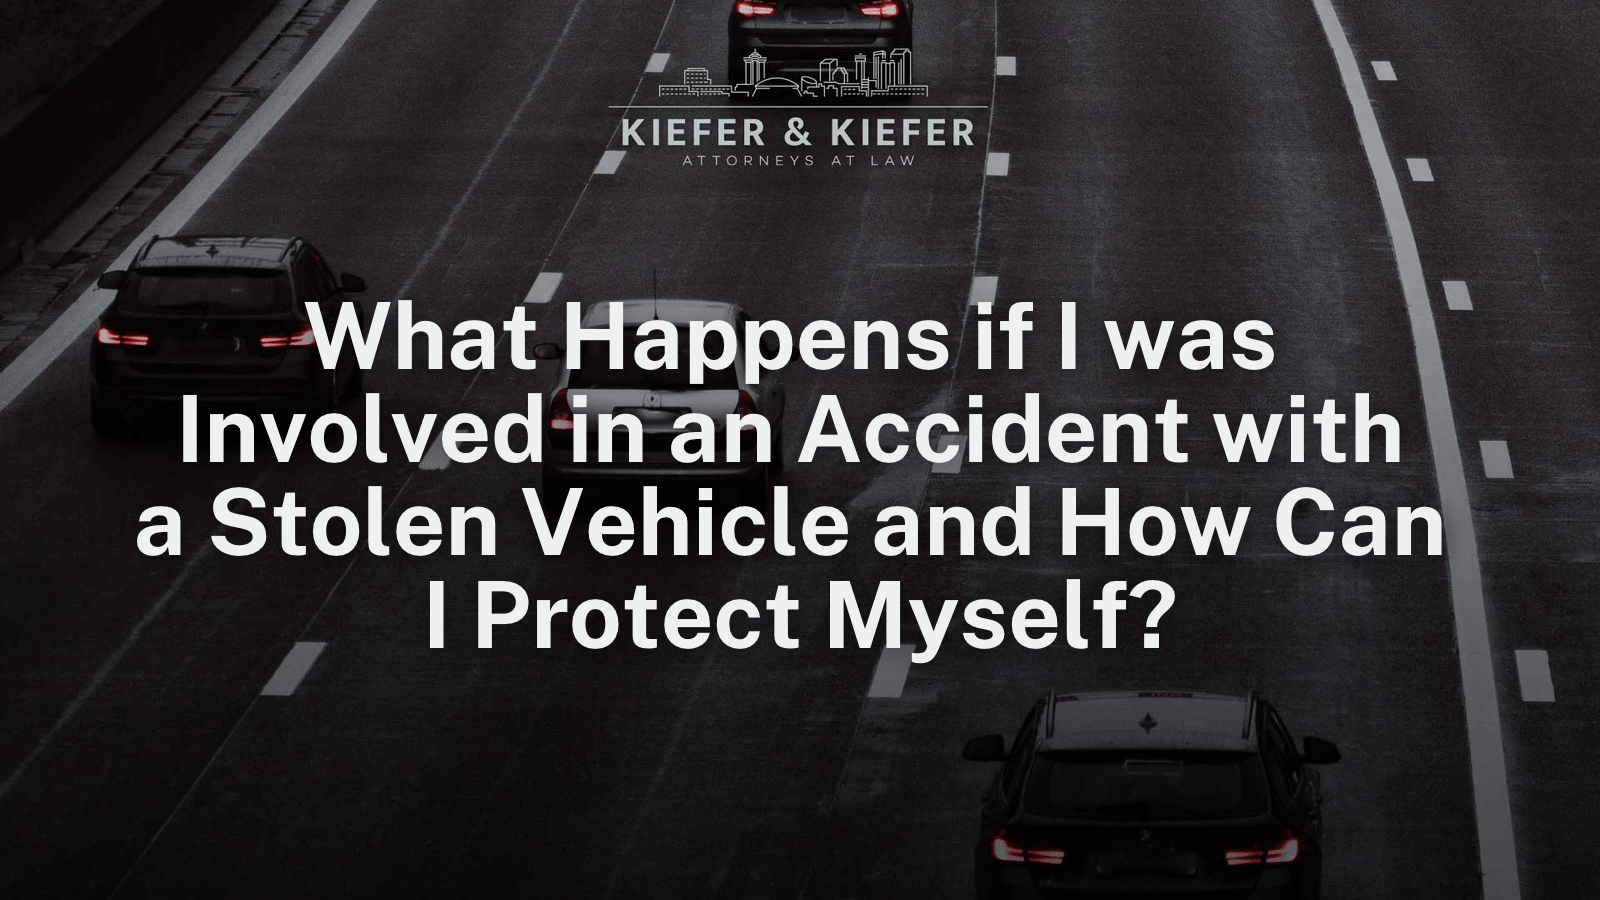 Involved in an Accident with a Stolen Vehicle new orleans - Kiefer & Kiefer New Orleans Personal Injury Attorneys